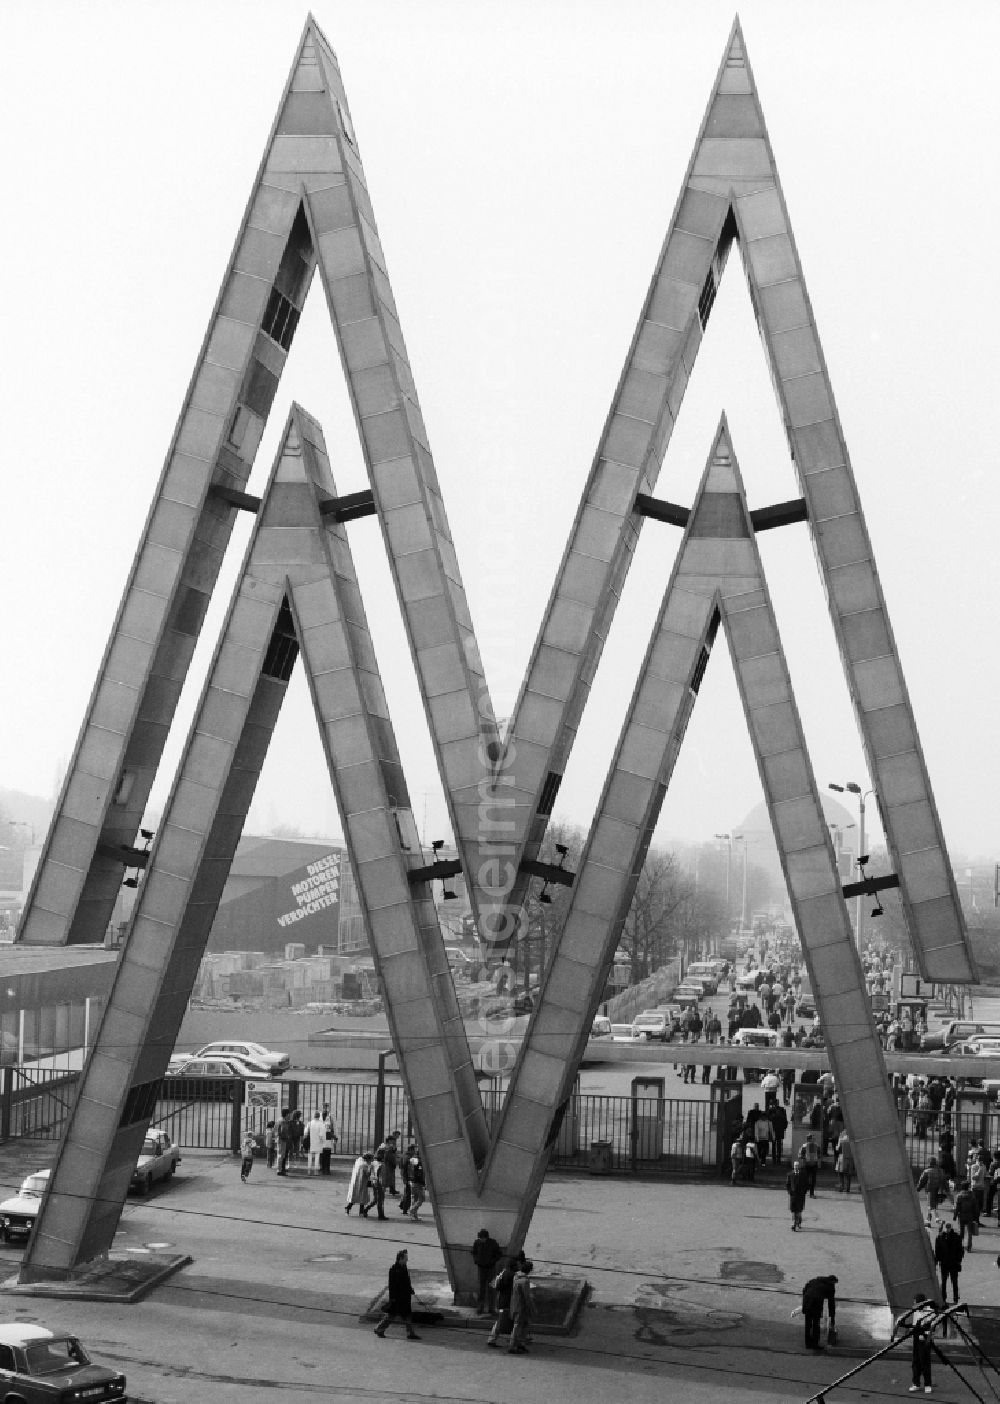 GDR picture archive: Leipzig - North entrance of Leipzig Spring Fair in Leipzig in Saxony in the area of the former GDR, German Democratic Republic. The double M emblem of the Leipziger Messe forms an original input design at two gates to the fairgrounds